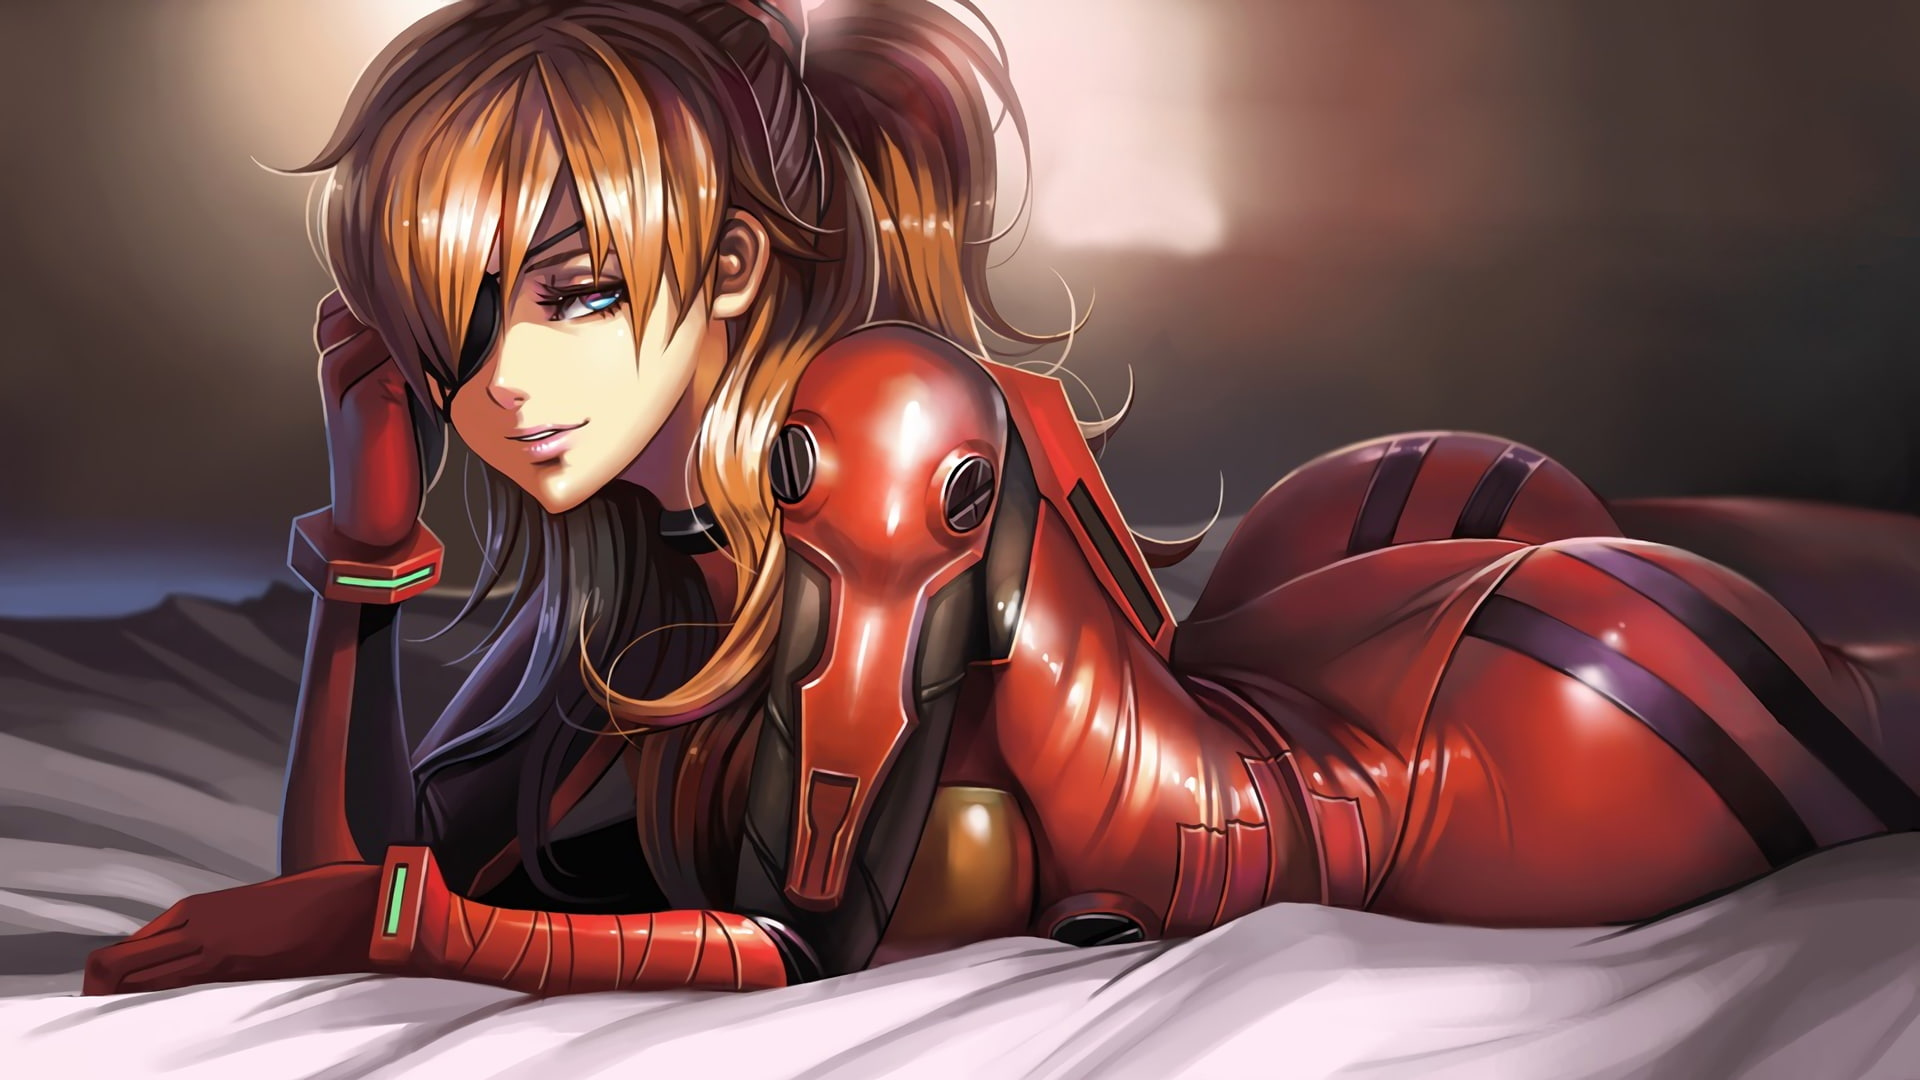 Best Toons Images On Pinterest Sexy Drawings Anime Girls